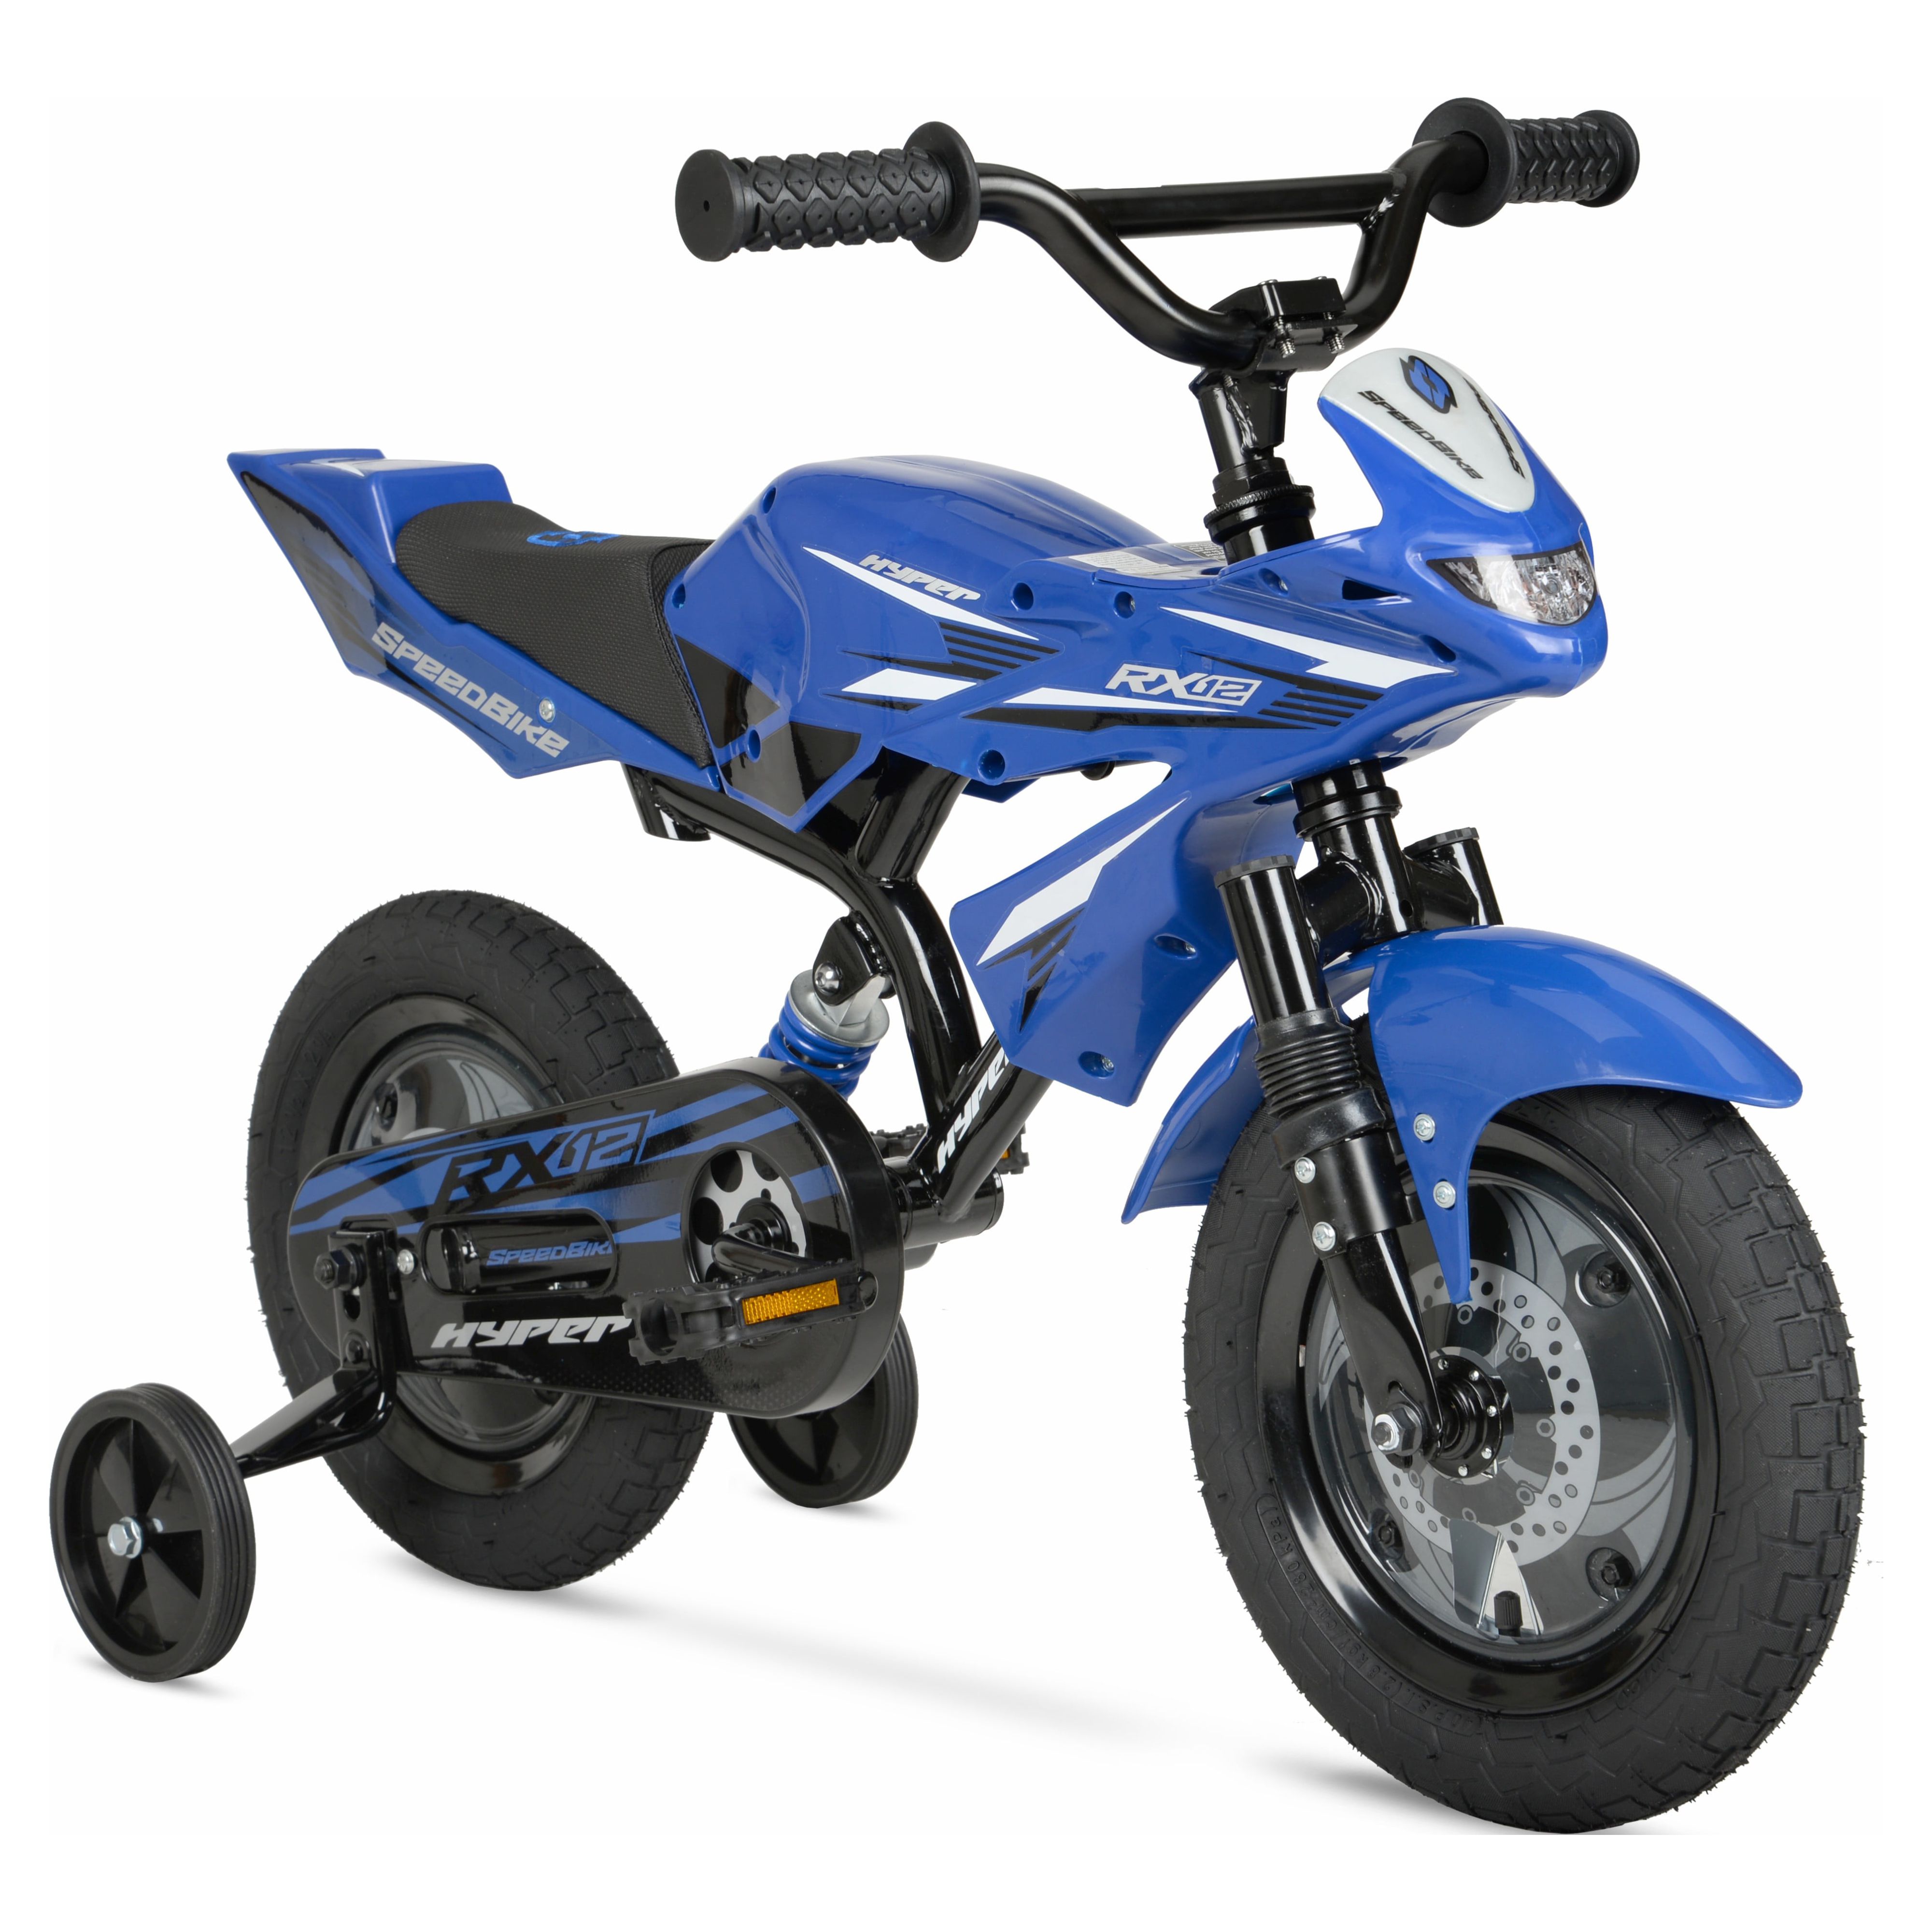 Hyper Bicycles 12" Boys Speedbike for kids, Blue, with Training Wheels, Ages 2 to 4 years old - image 1 of 9